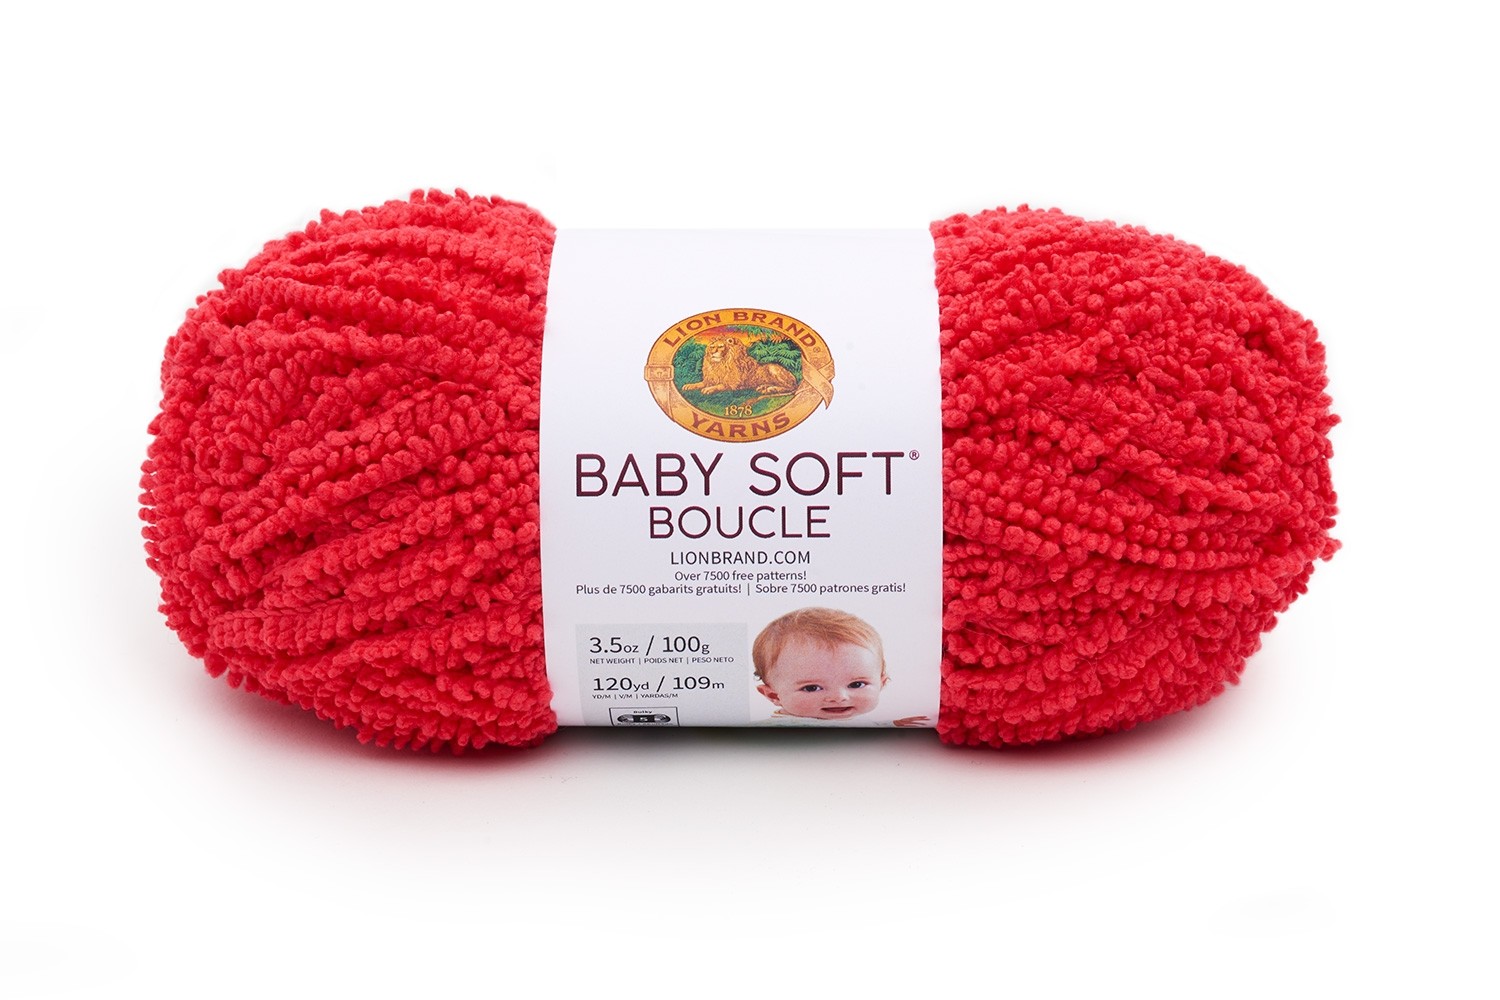 baby soft boucle yarn Archives - Evelyn And Peter Crochet